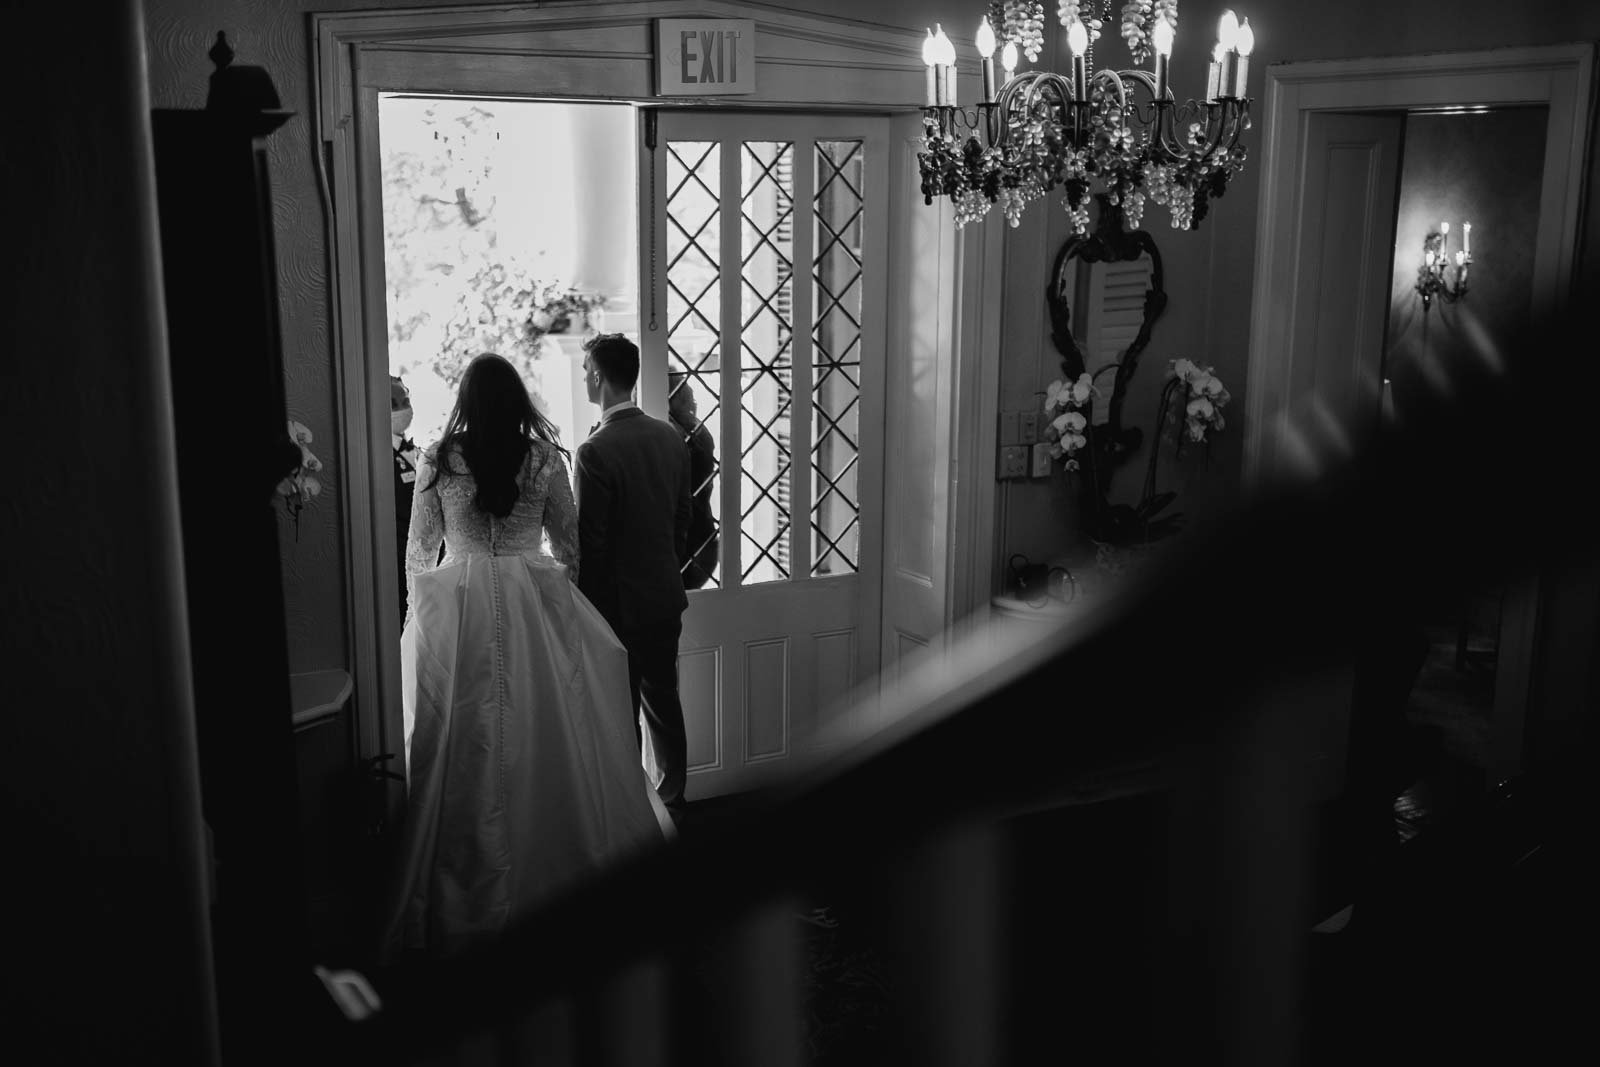 The bride and groom get ready to exit out onto the reception with the crowd waiting photographed in black-and-white for the staircase photograph with a Summilux 35mm on a lake and rangefinder through the glass pane door the bottom room hold hands